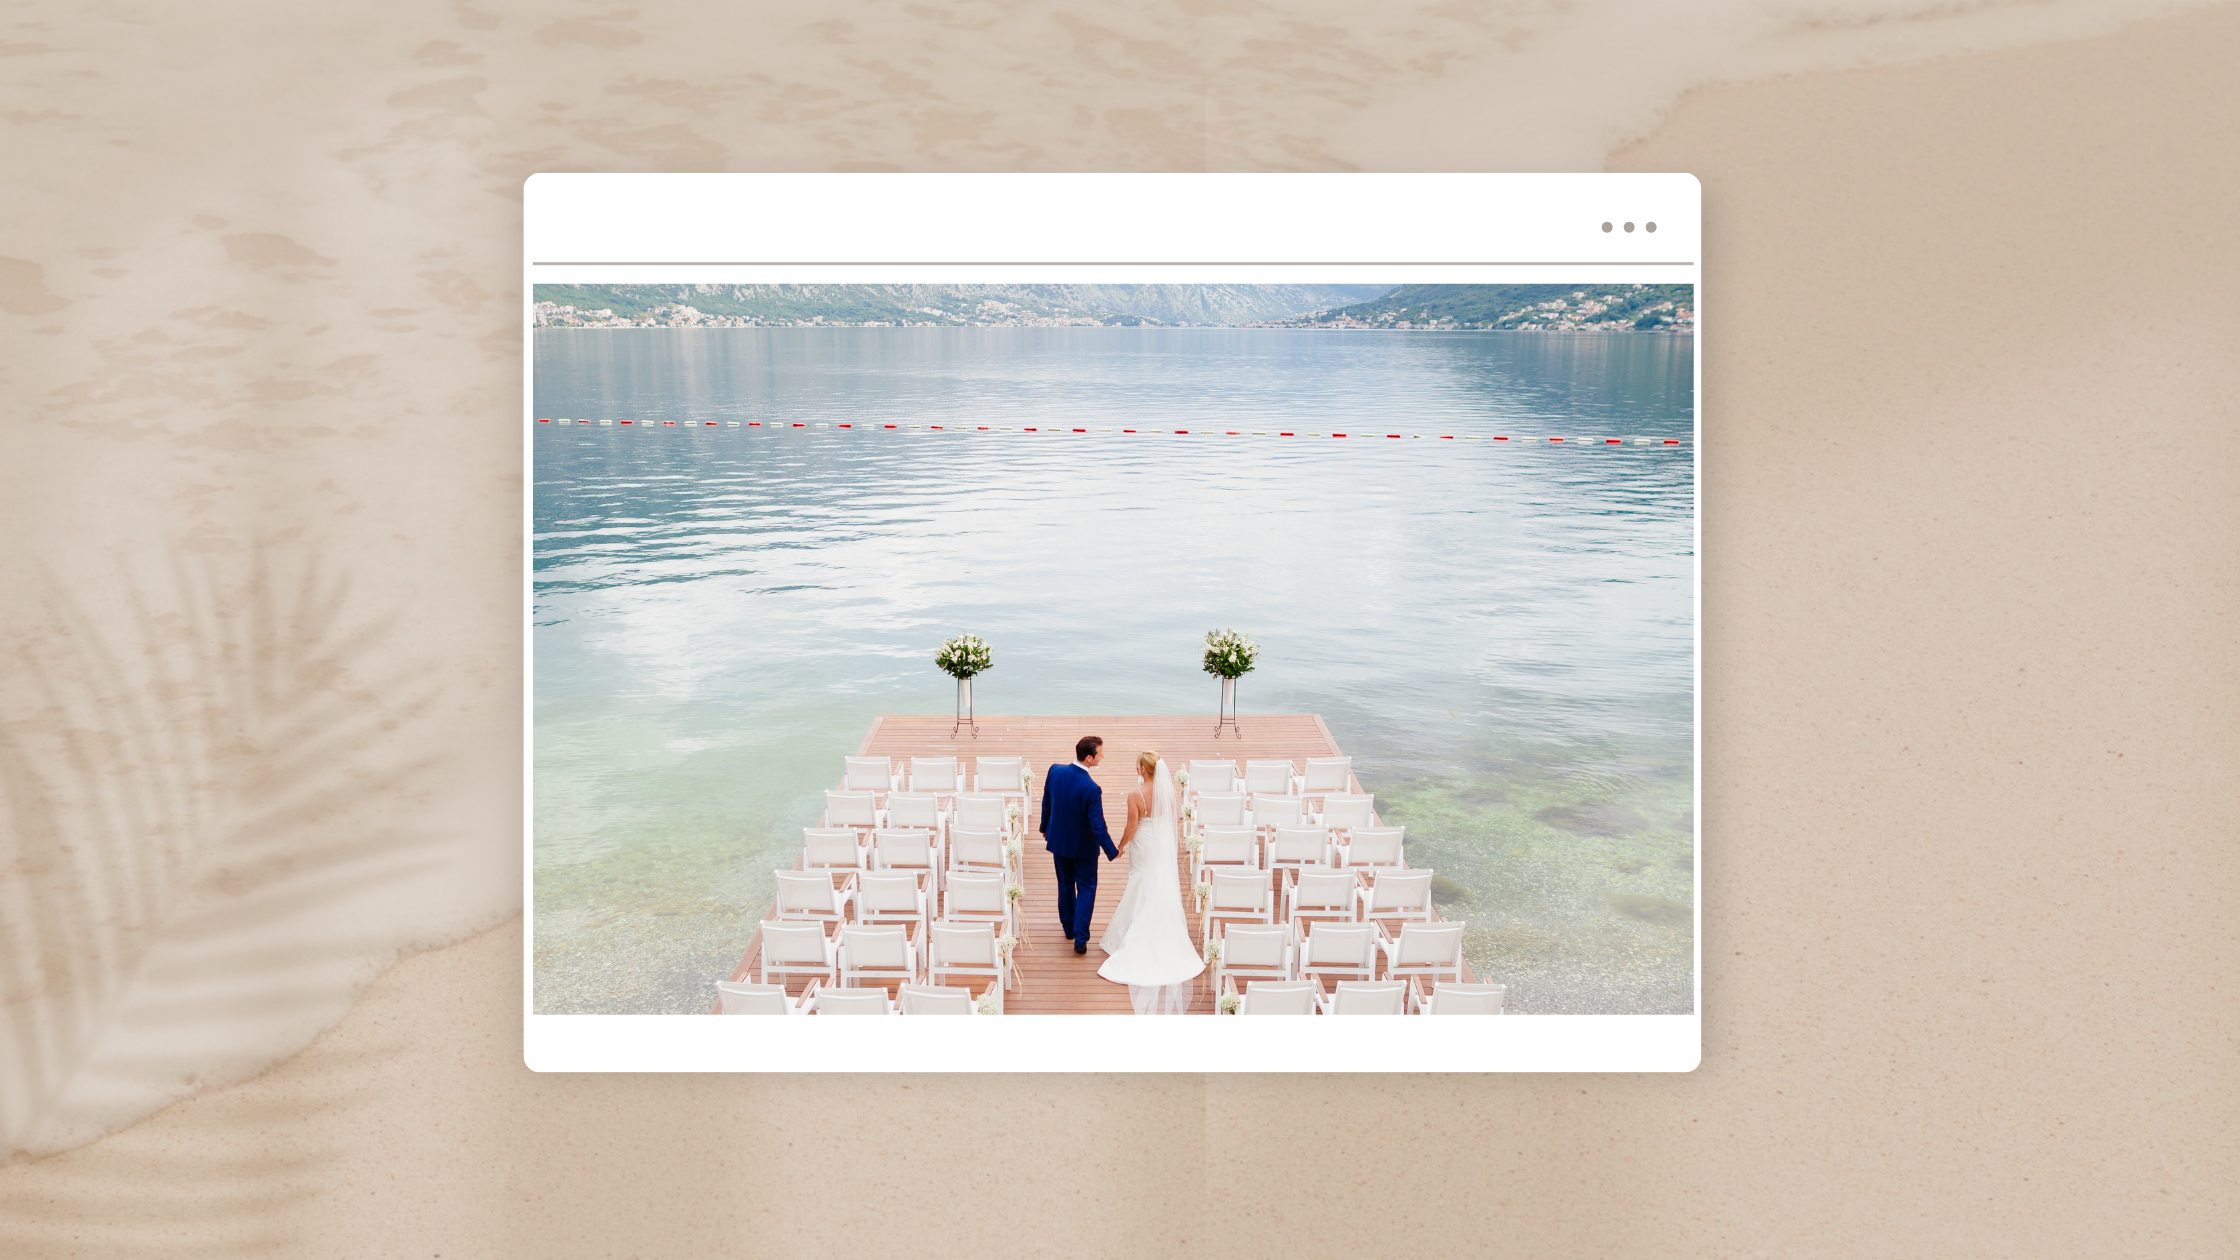 Website browser image with destination wedding on the beach